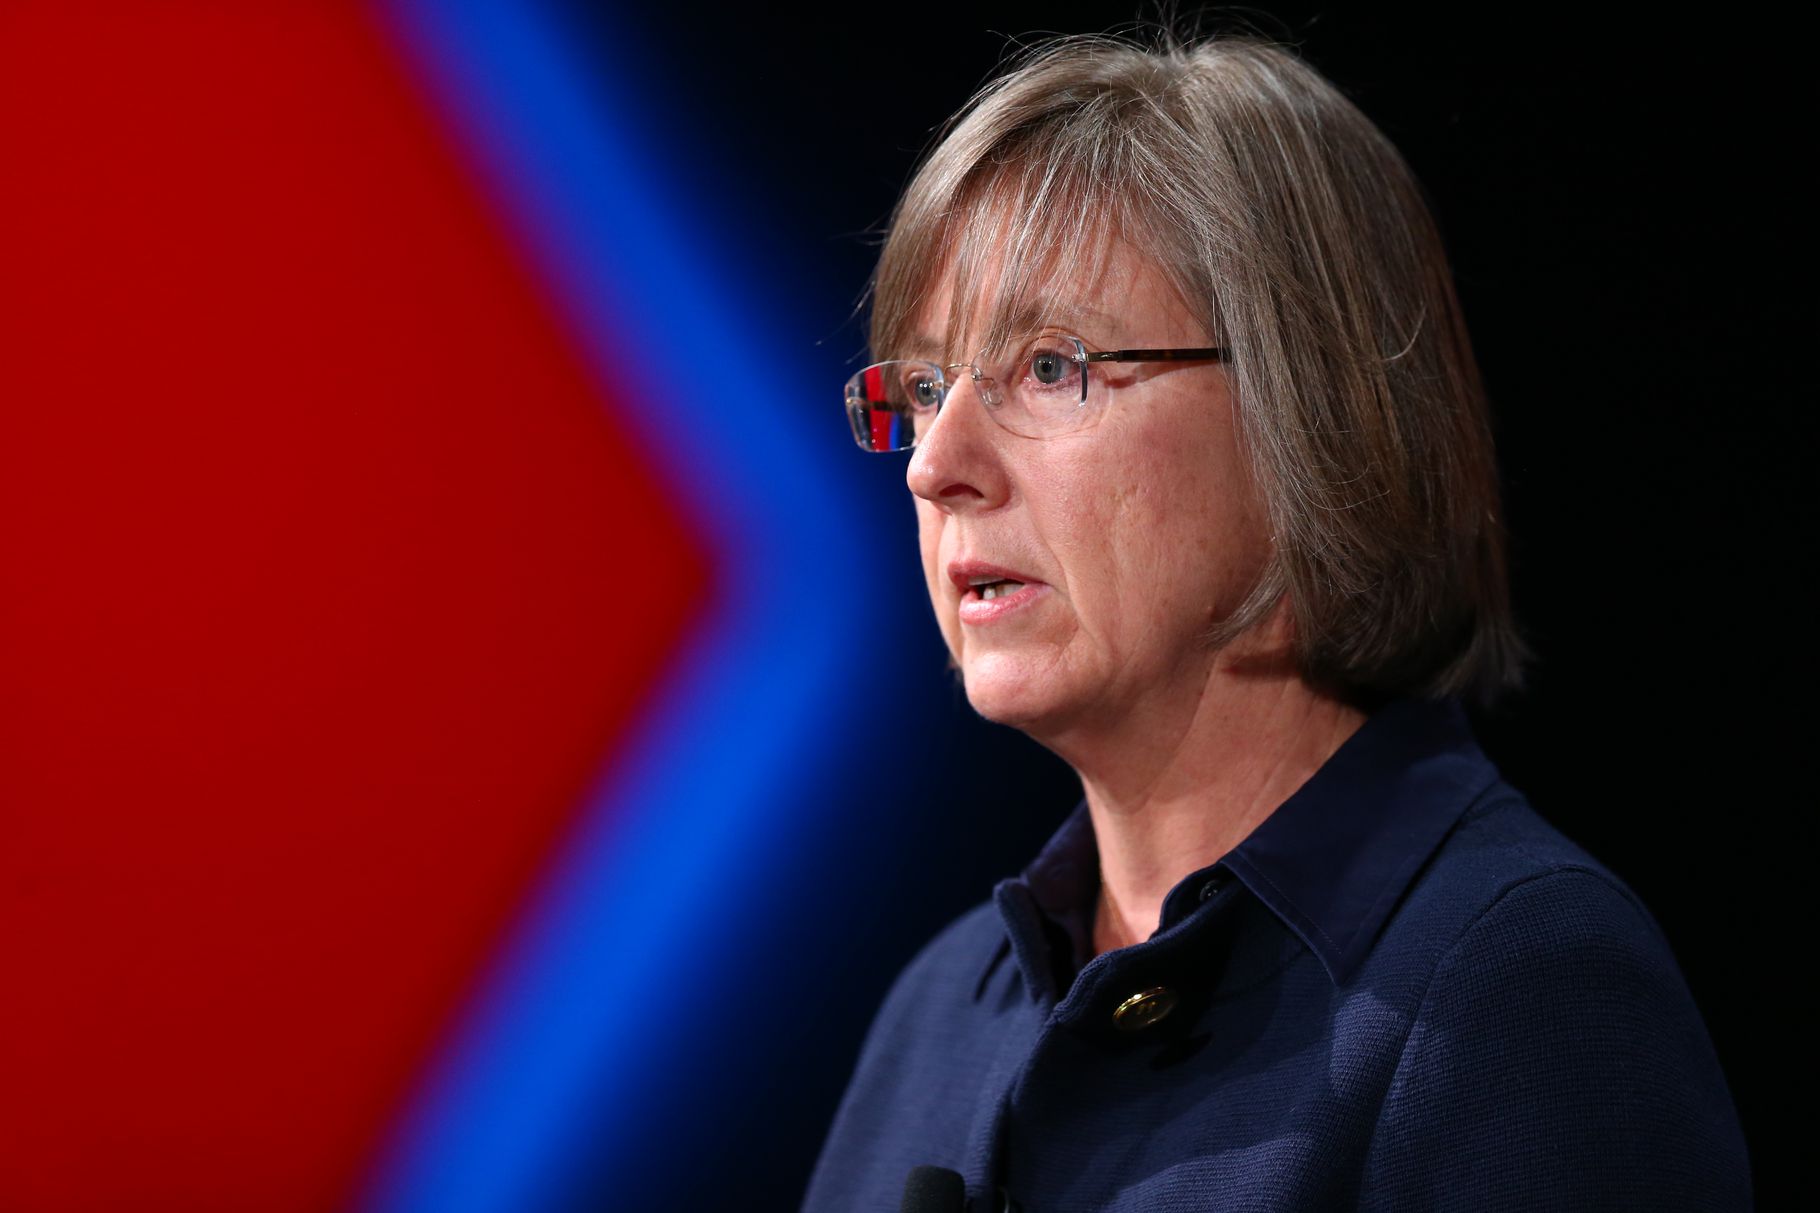 Mary Meeker introduces ecommerce trends from the Kleiner Perkins Internet Trends 2017 Report. Image via Recode.